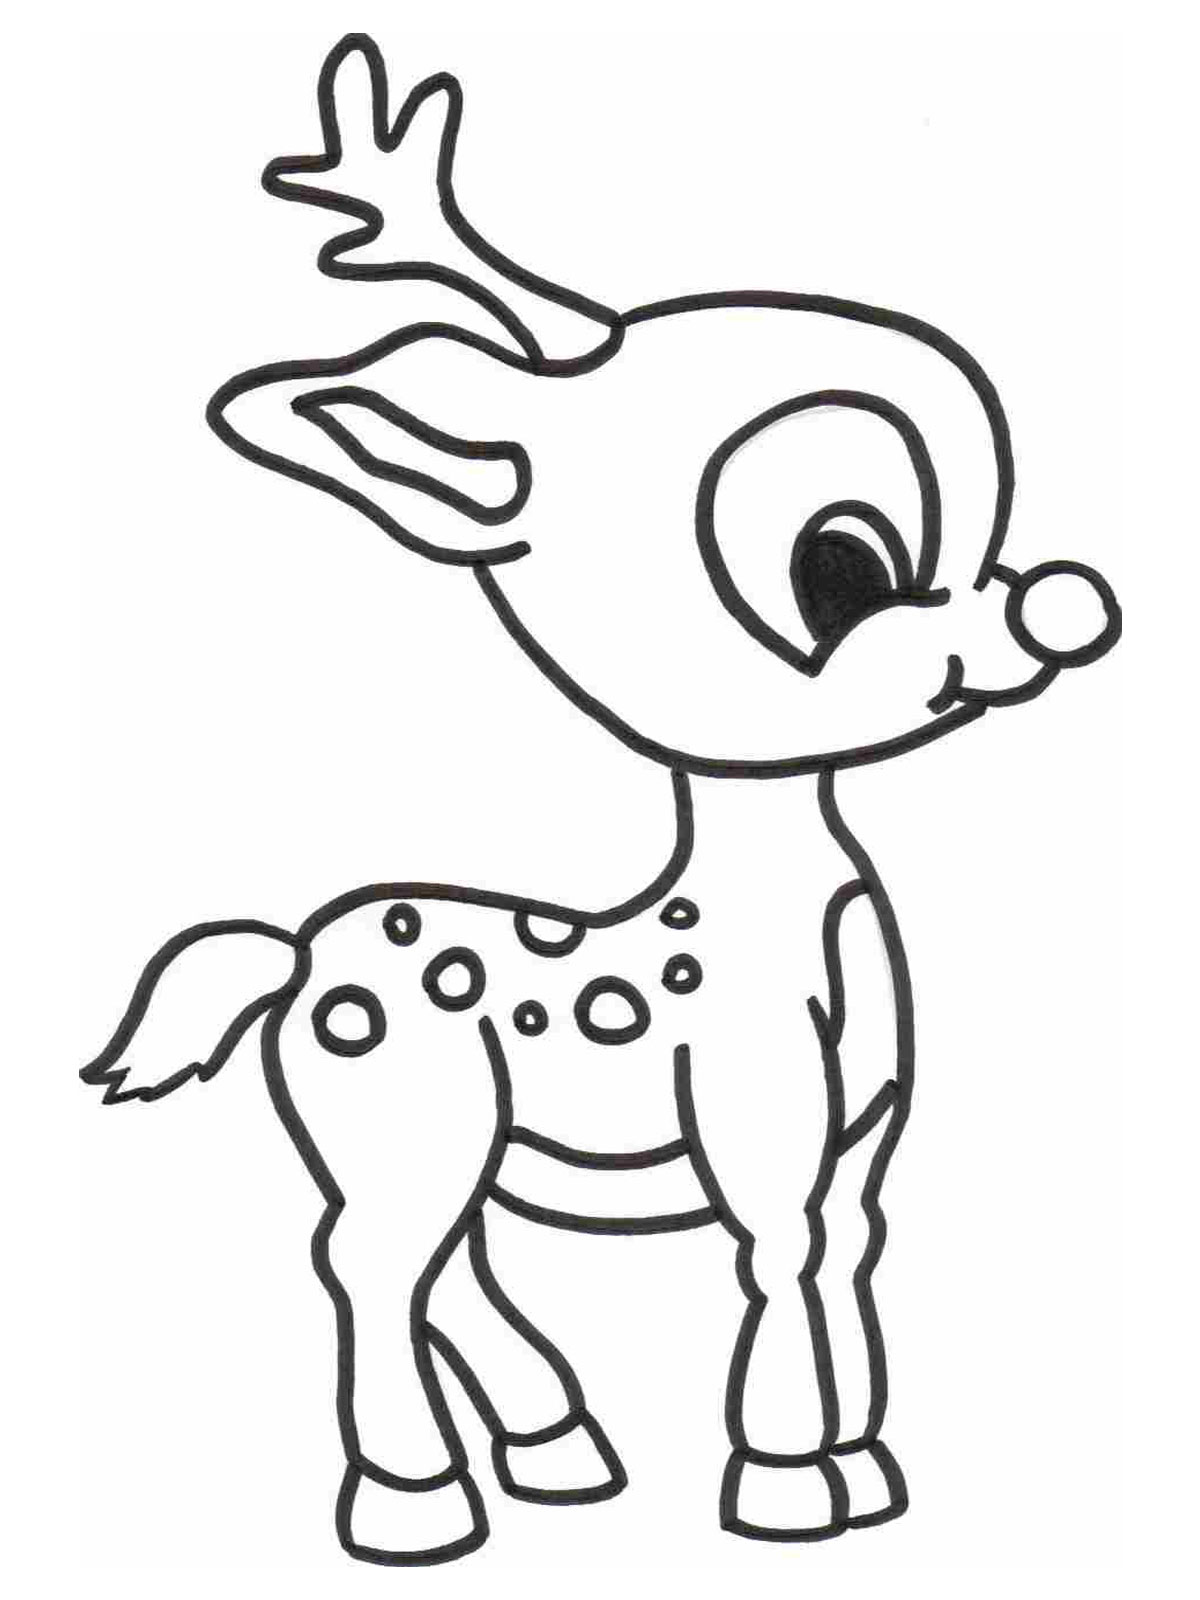  Coloring Pages Of Animals To Print For Free   4